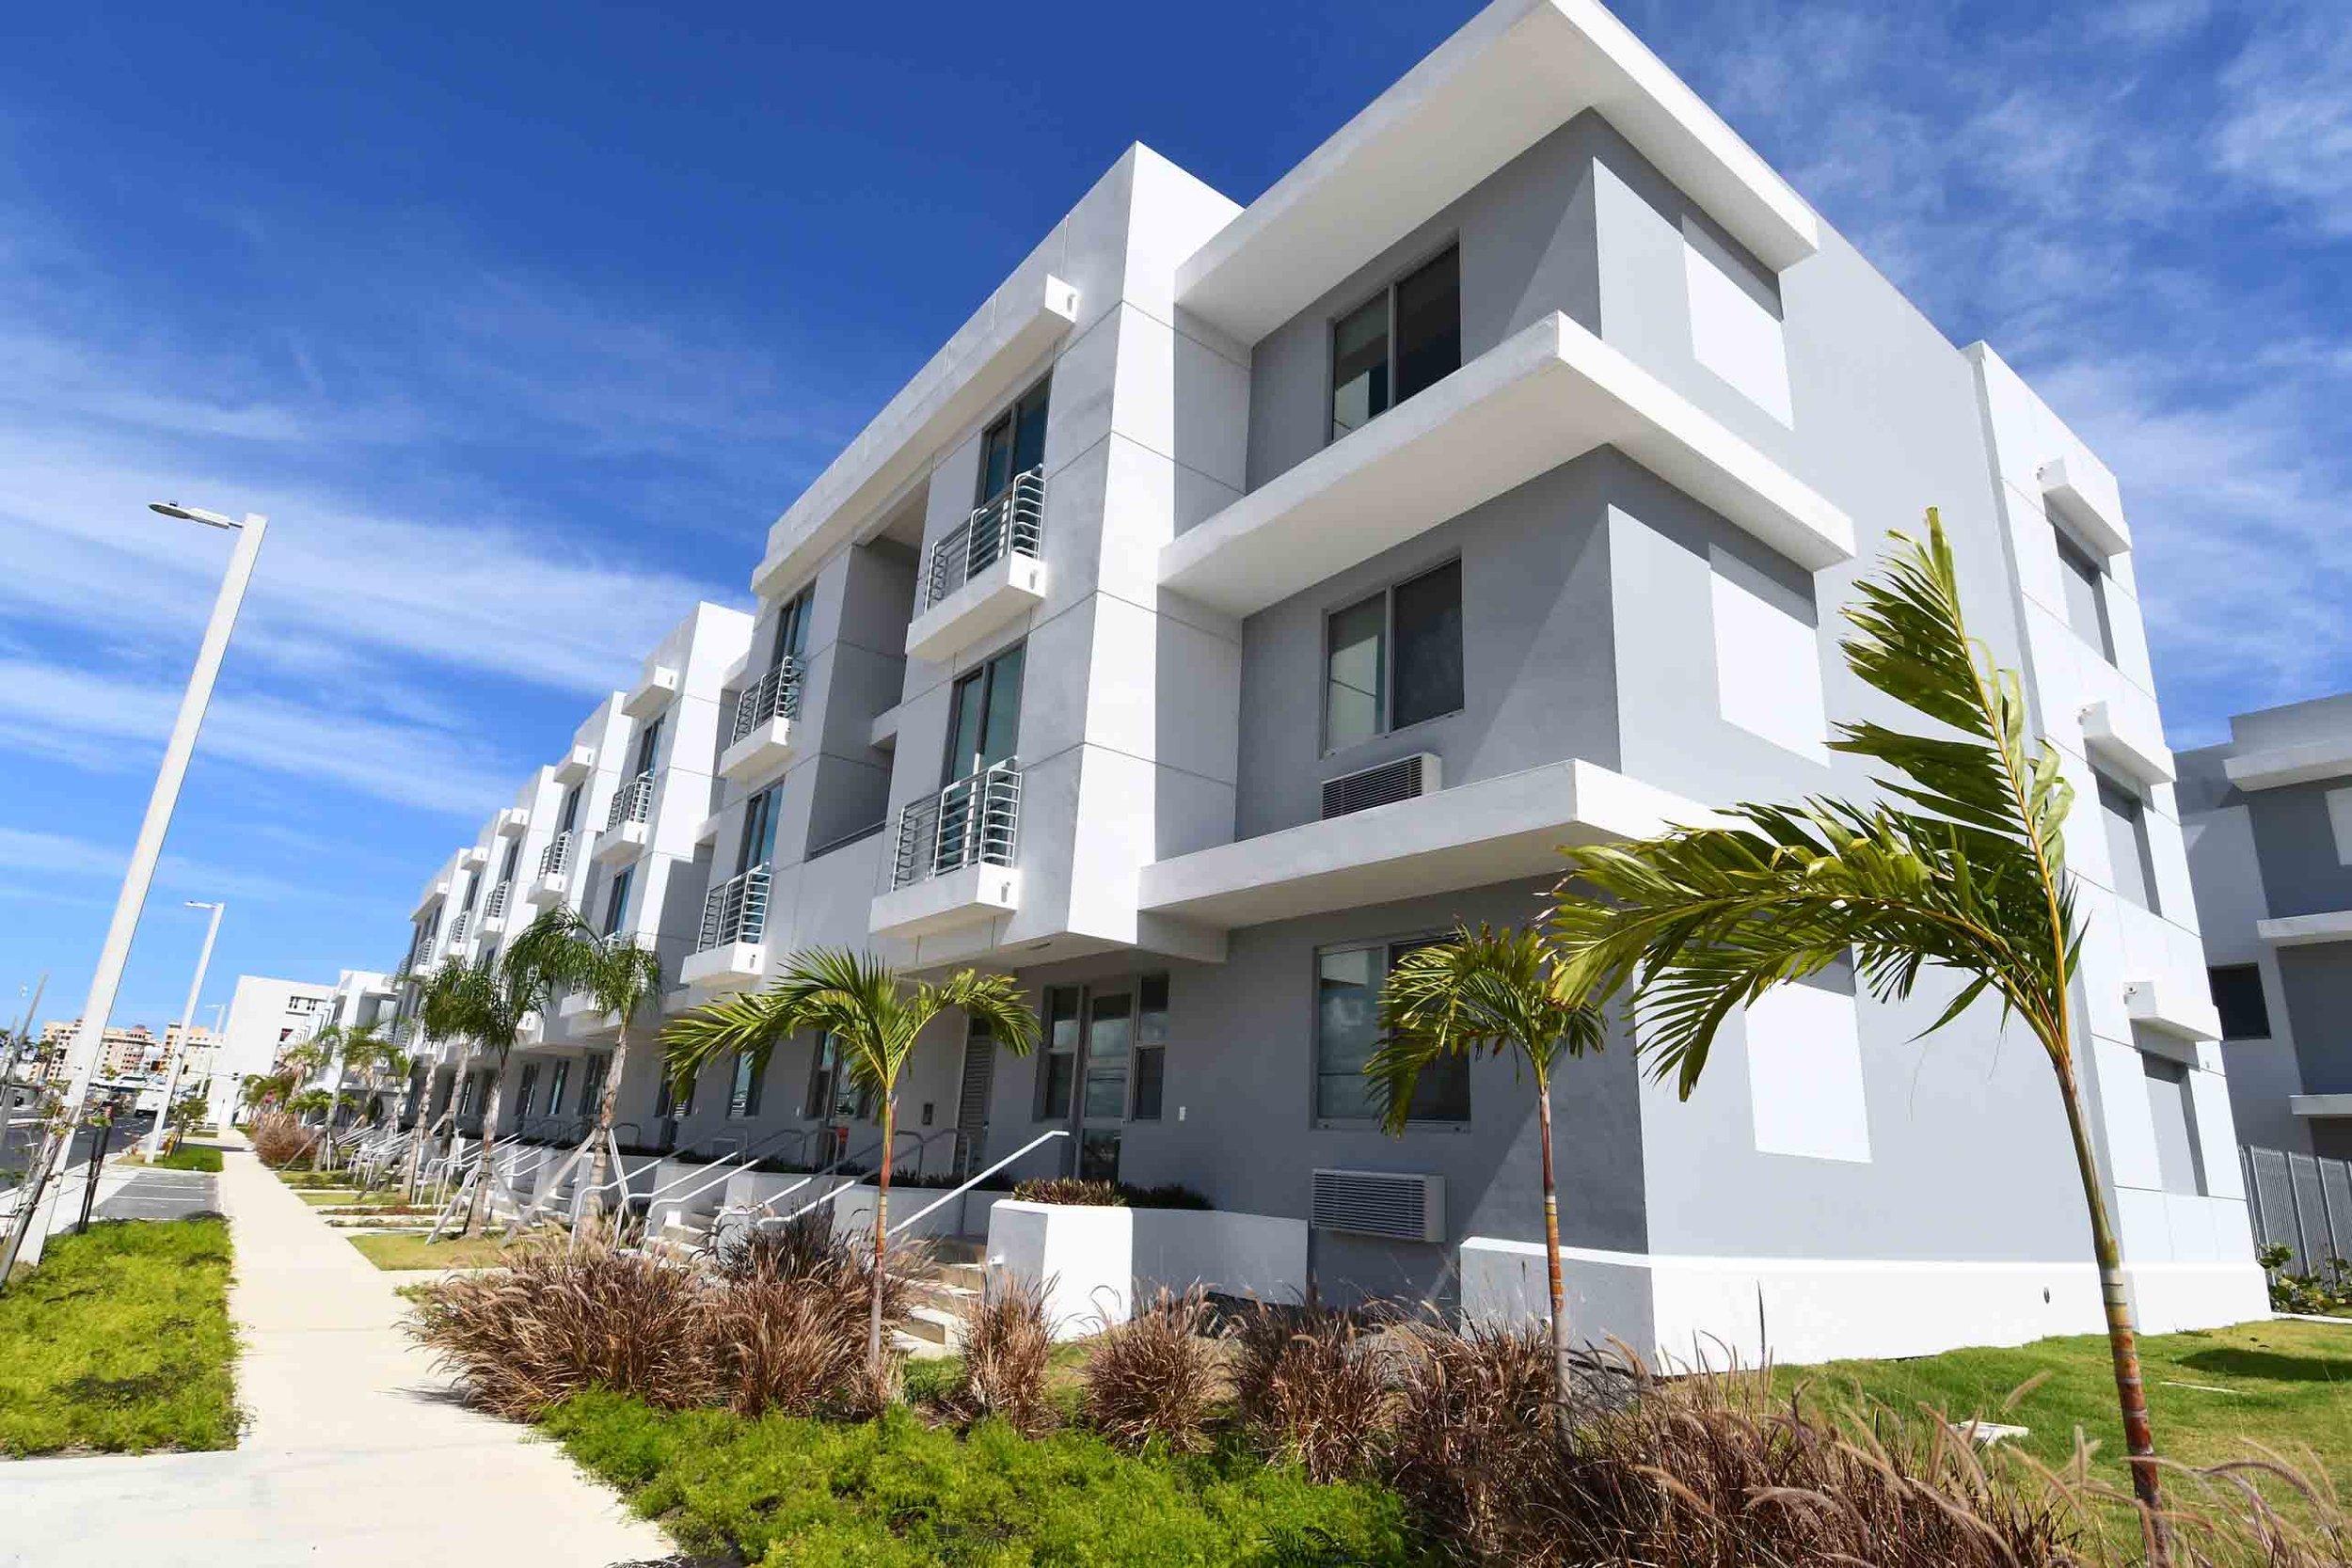  Exterior view of Bayshore Villas affordable housing project. 